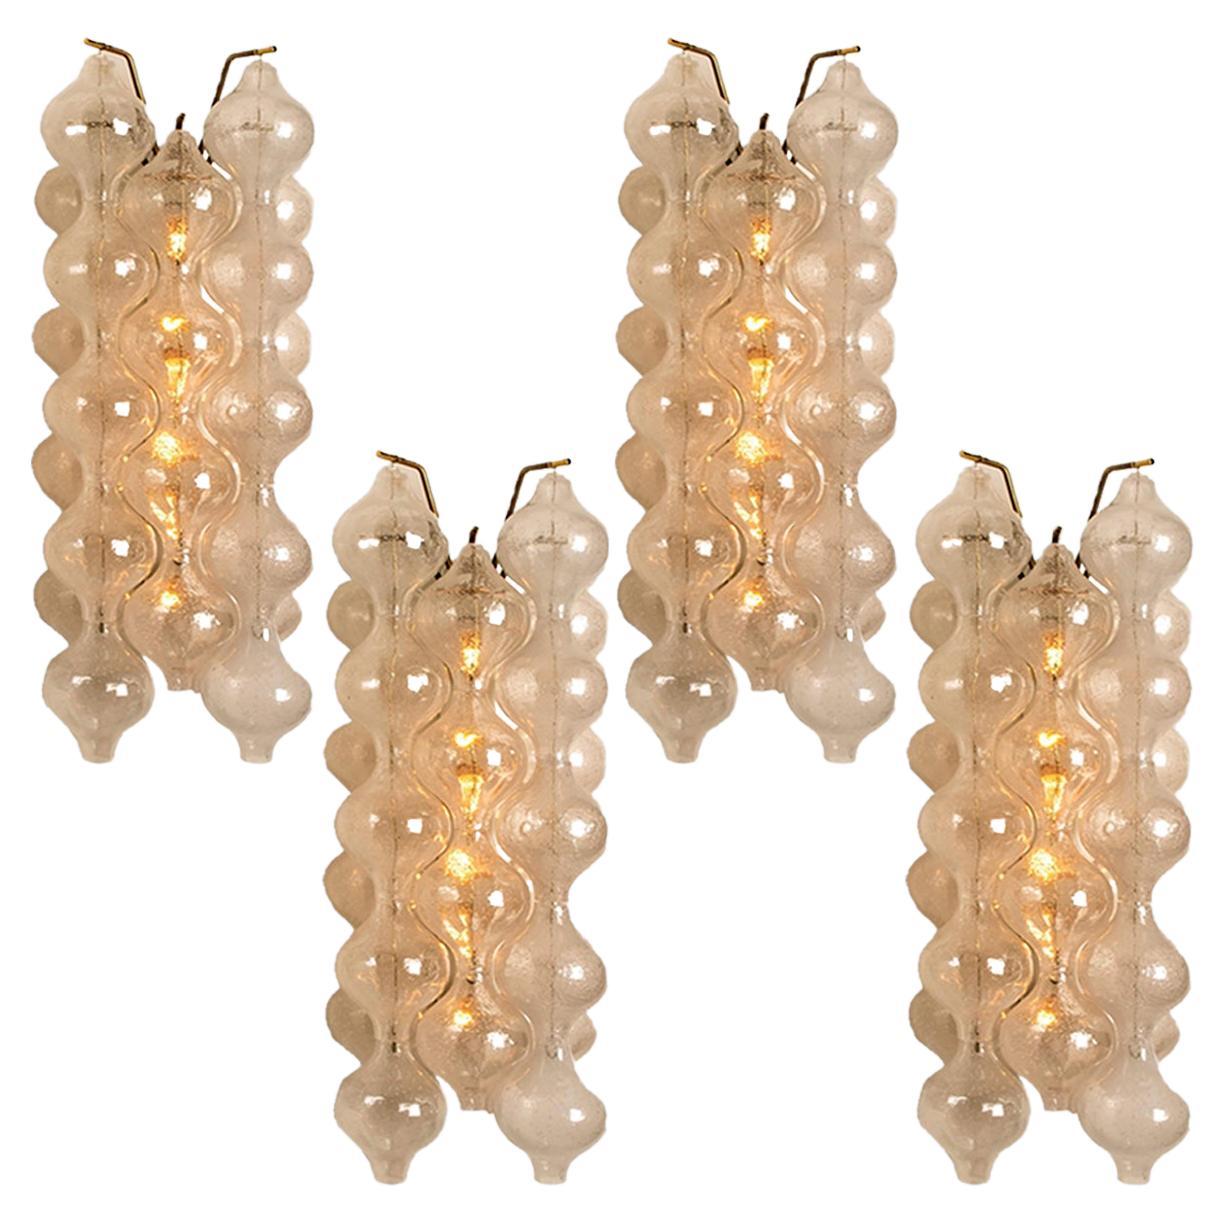 1 of 2  Pairs of Large Tulipan Wall Lamps Sconces by Kalmar 'H 21.2', 1970s